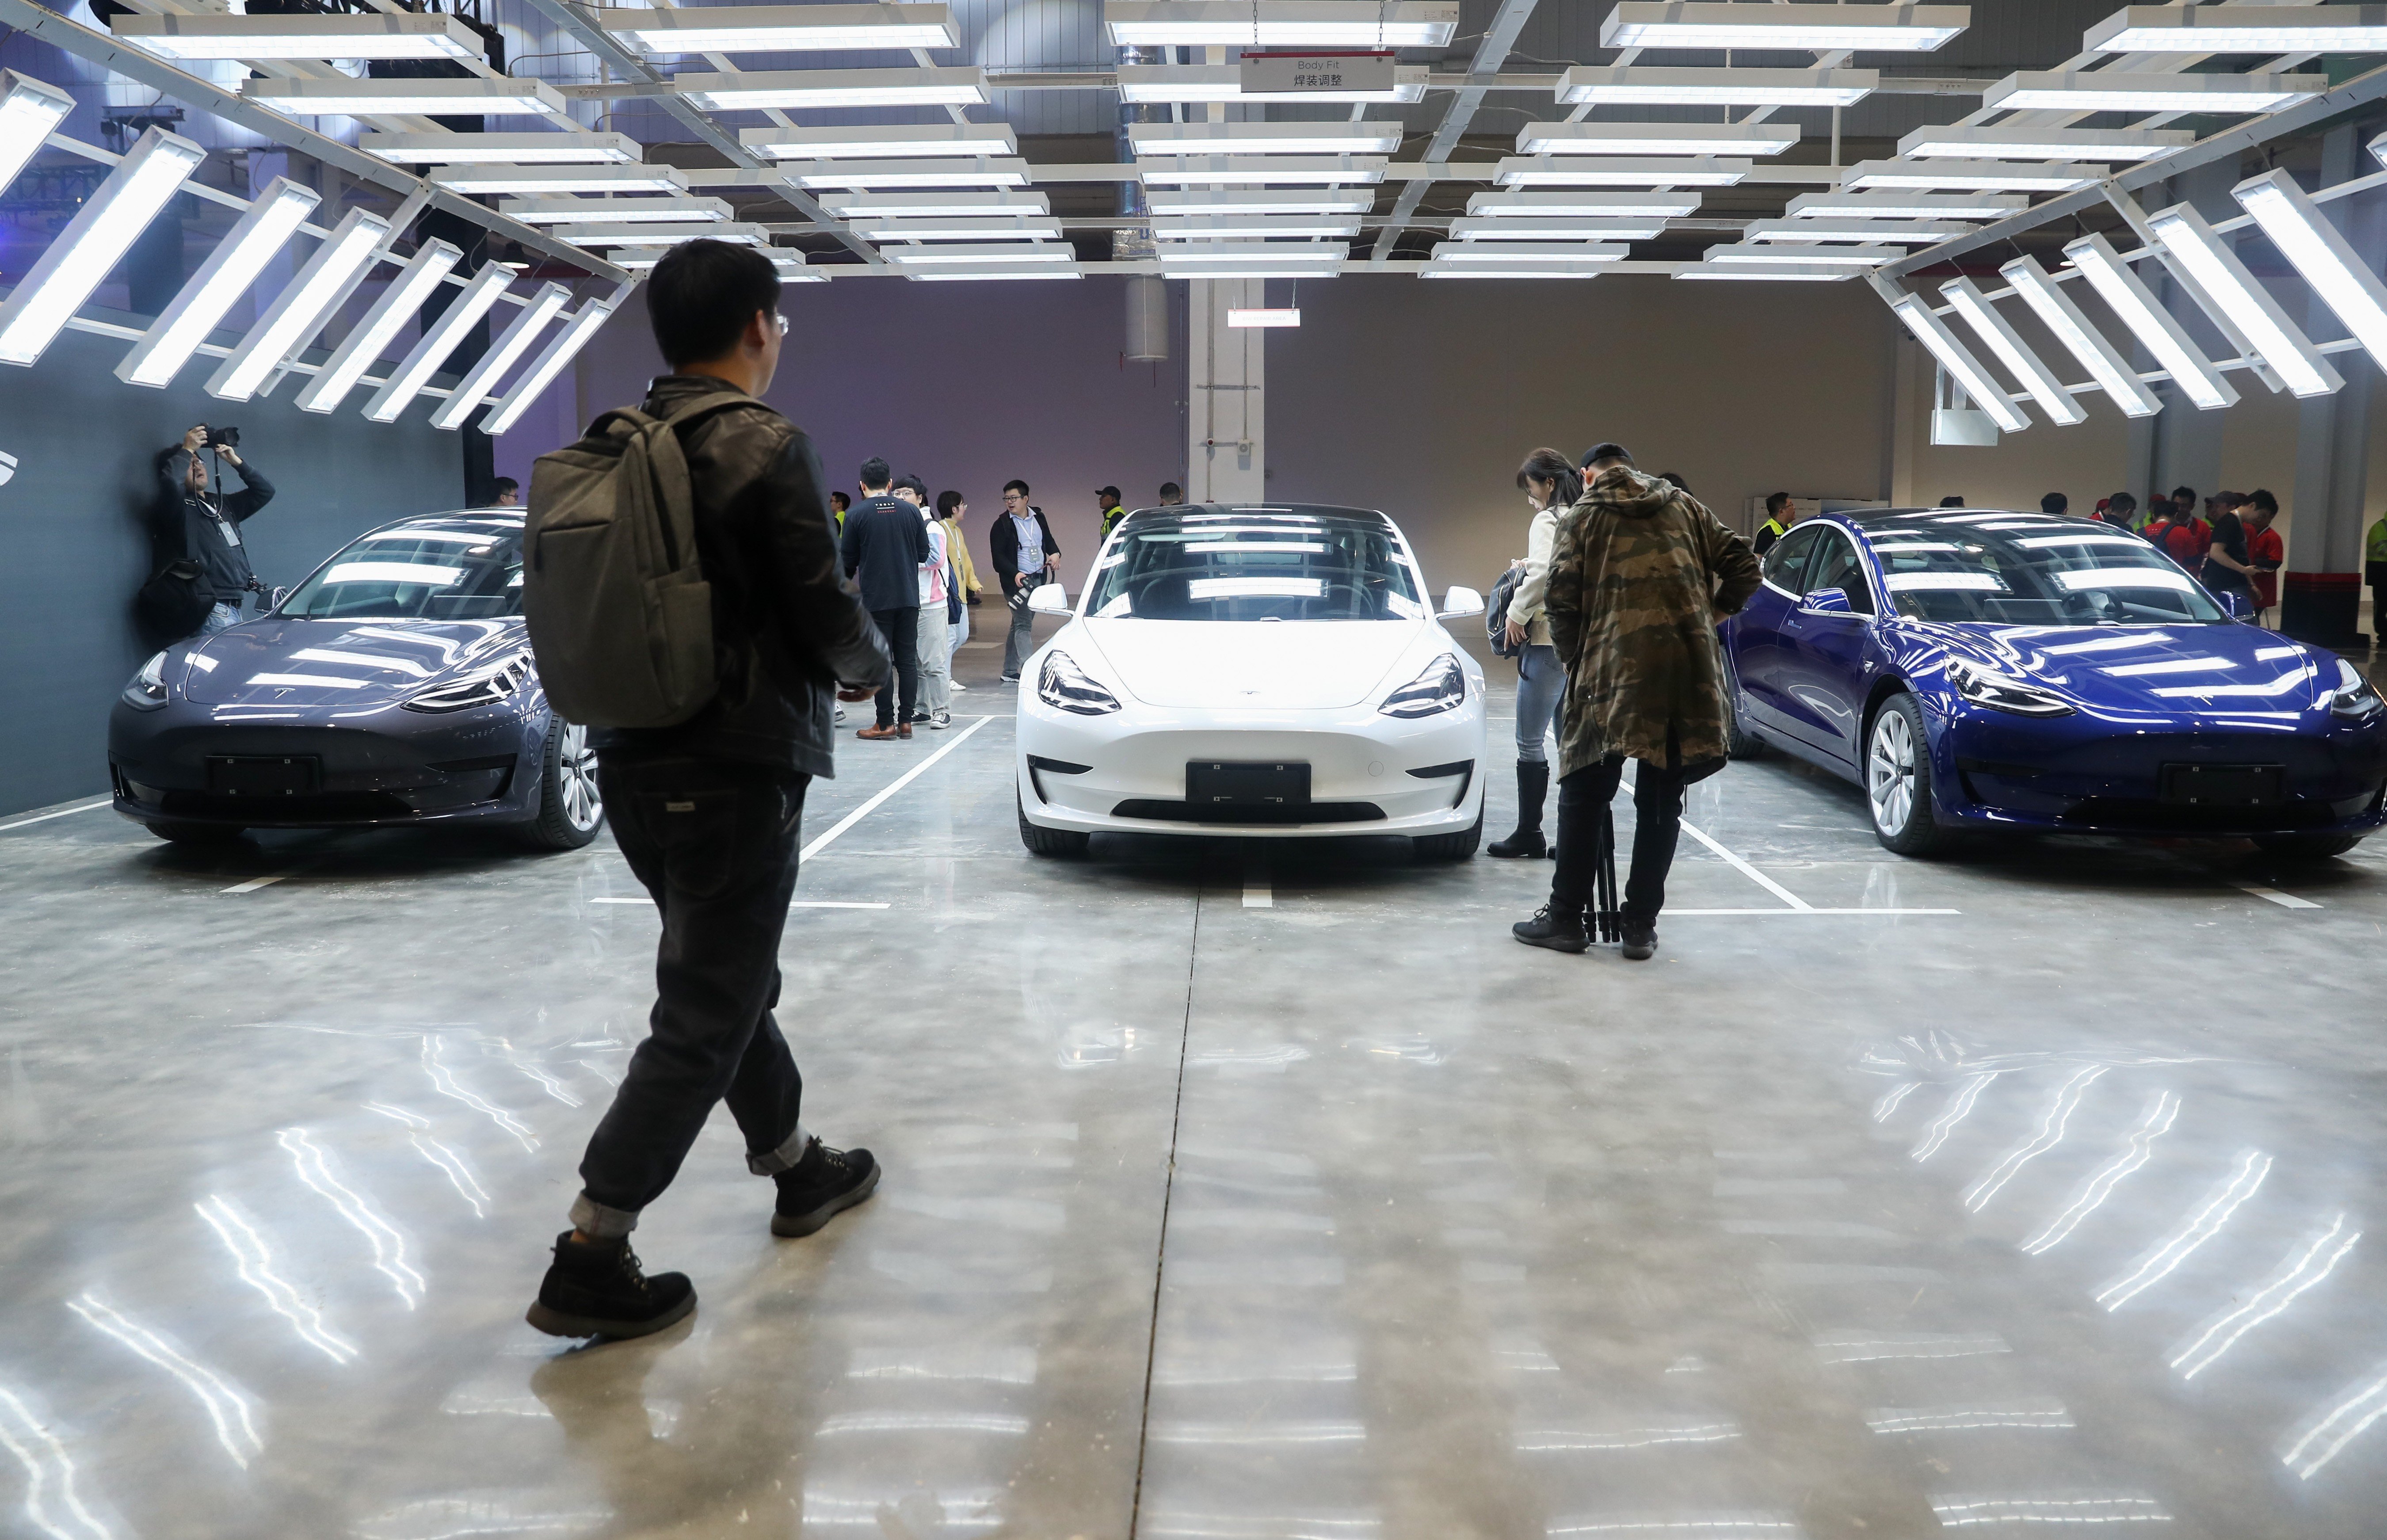 Despite being home to Tesla’s US$2 billion Gigafactory 3, Shanghai’s ambitions of transforming itself into a global financial centre by this year remain unfulfilled. Photo: Xinhua